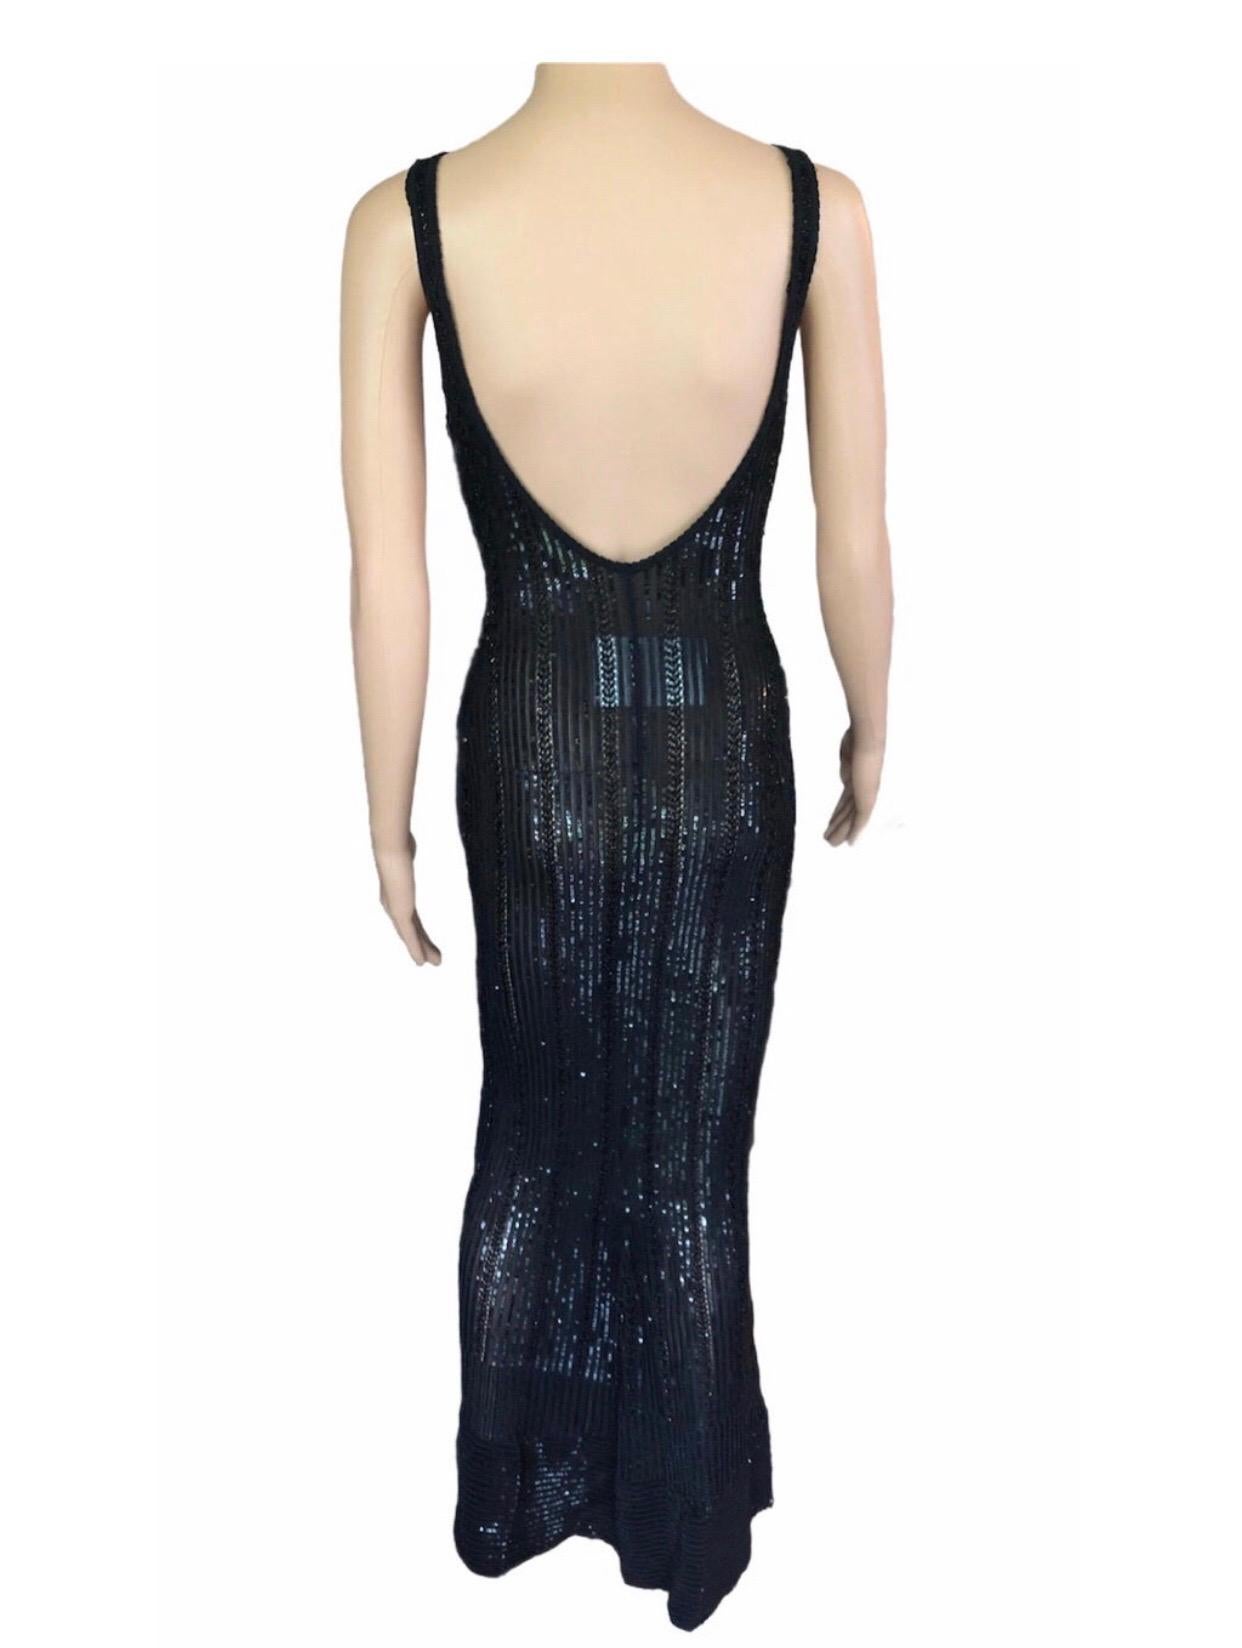 Azzedine Alaia Vintage S/S 1996 Runway Black Sequin Embellished Dress Gown In Excellent Condition For Sale In Naples, FL